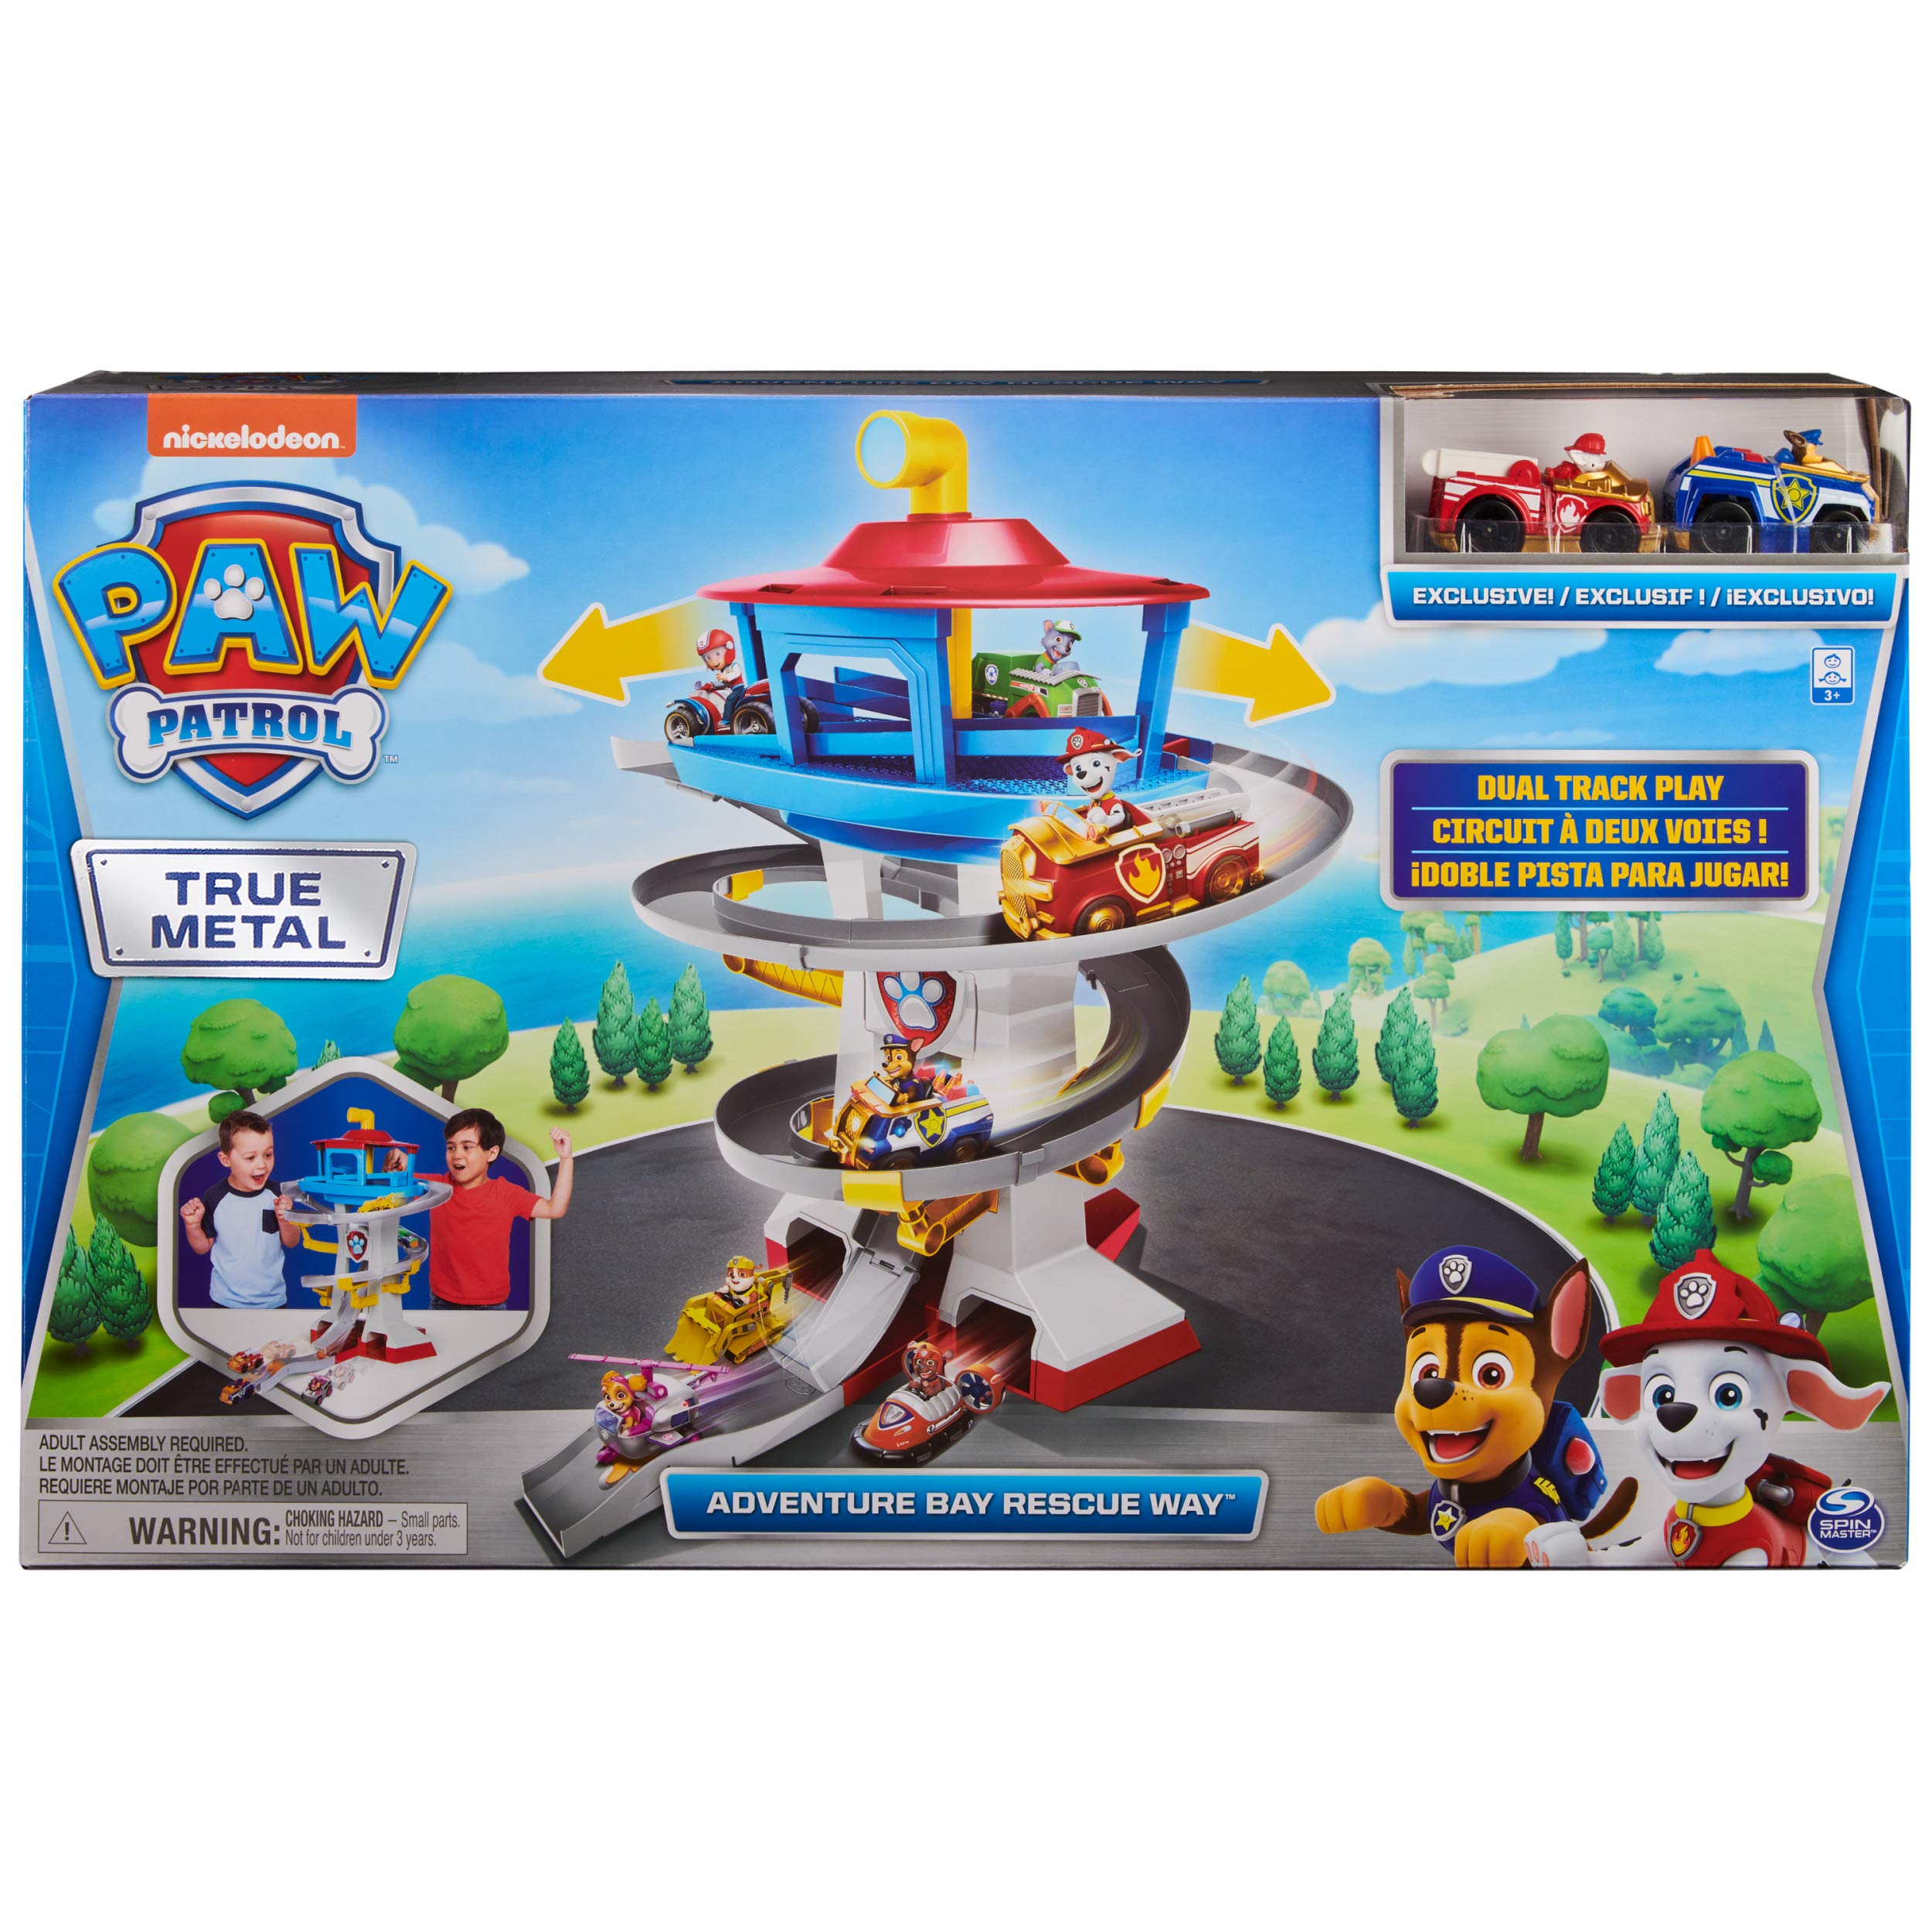 Paw Patrol, True Metal Adventure Bay Rescue Way Toy Playset with 2 Exclusive Die-Cast Vehicles, 1:55 Scale